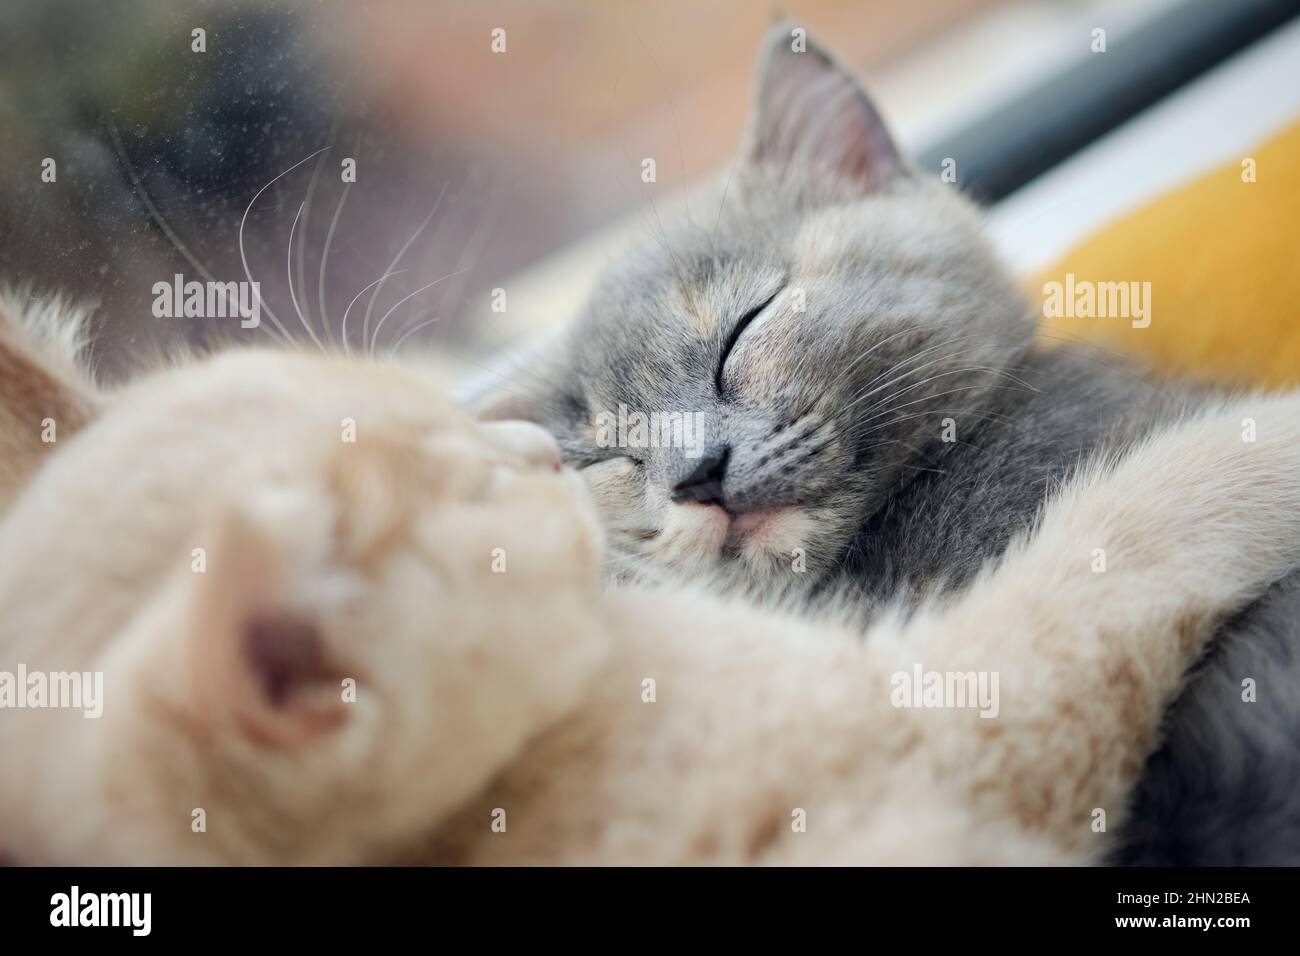 close-up of two cute cats napping together Stock Photo